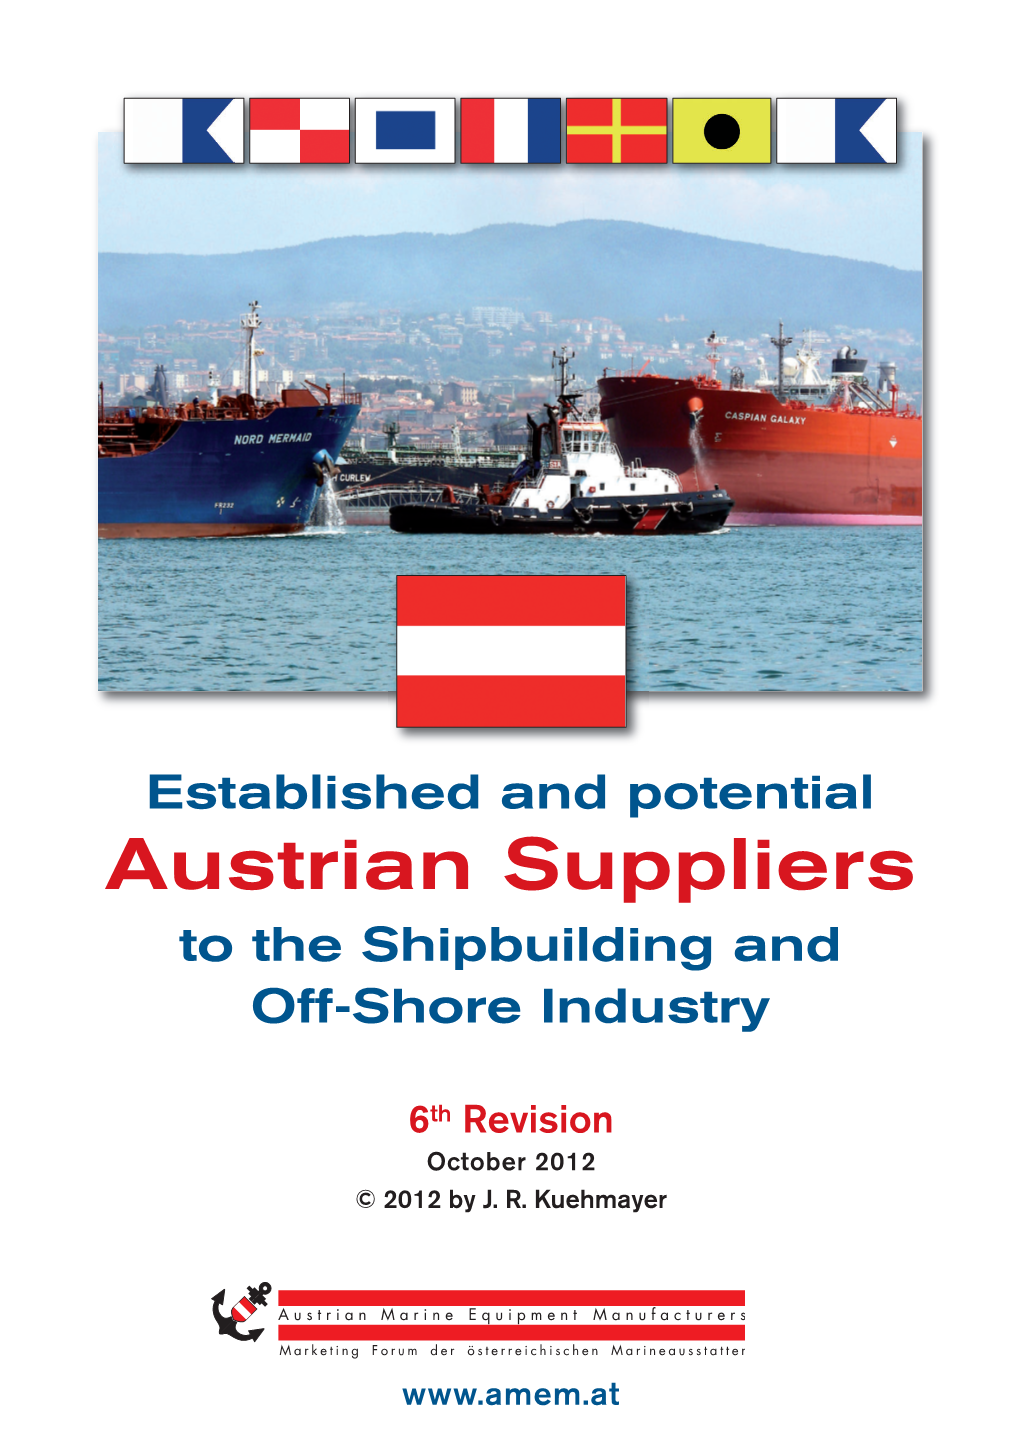 Austrian Suppliers to the Shipbuilding and Off-Shore Industry